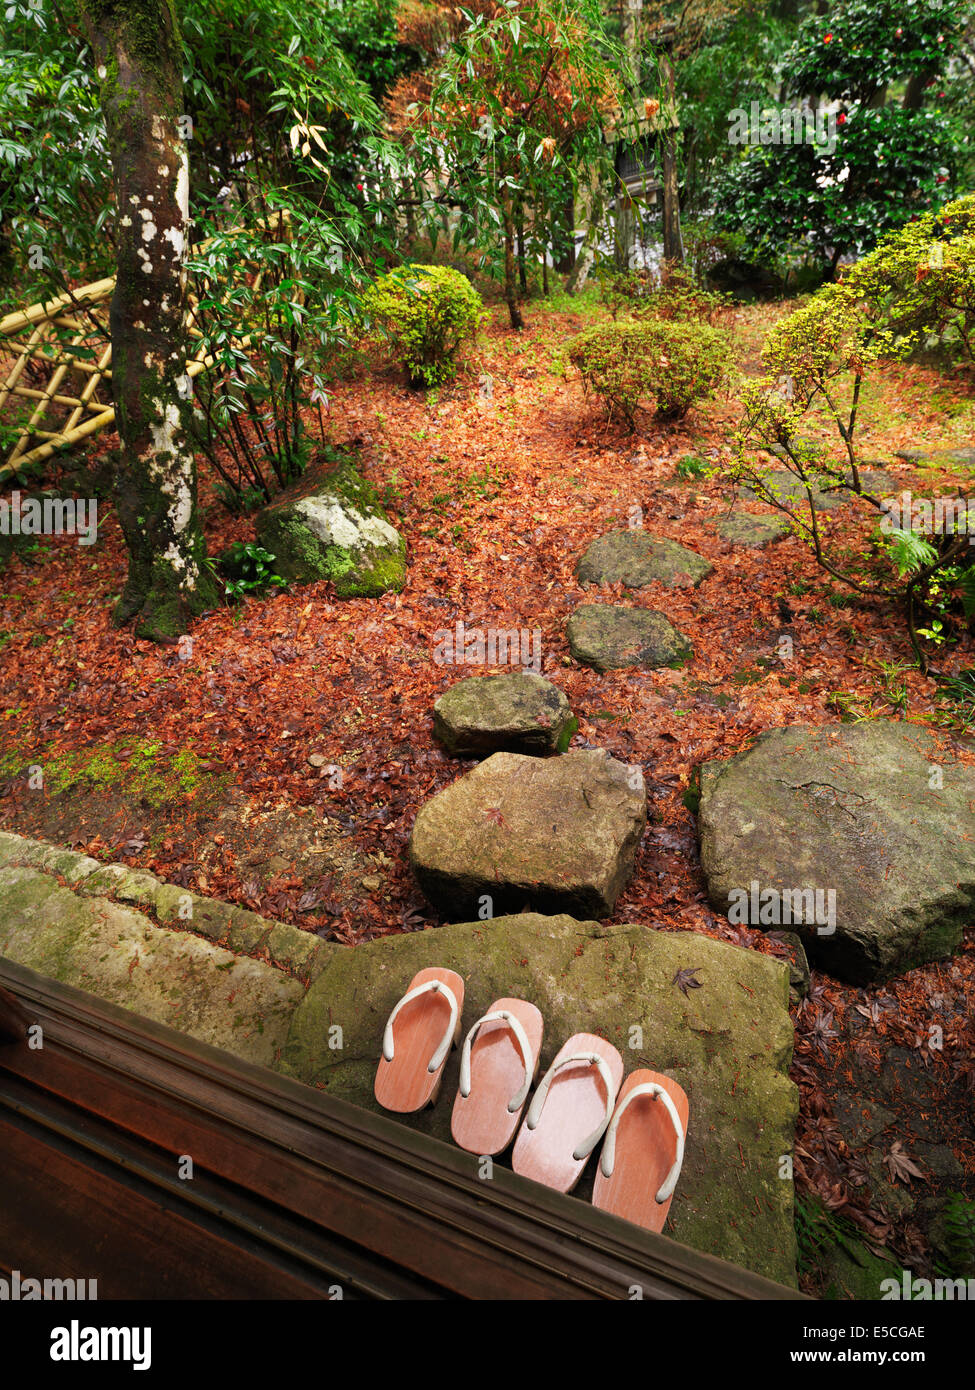 Geta shoes outside a ryokan room with a Japanese garden after a rain. Gero, Japan. Stock Photo